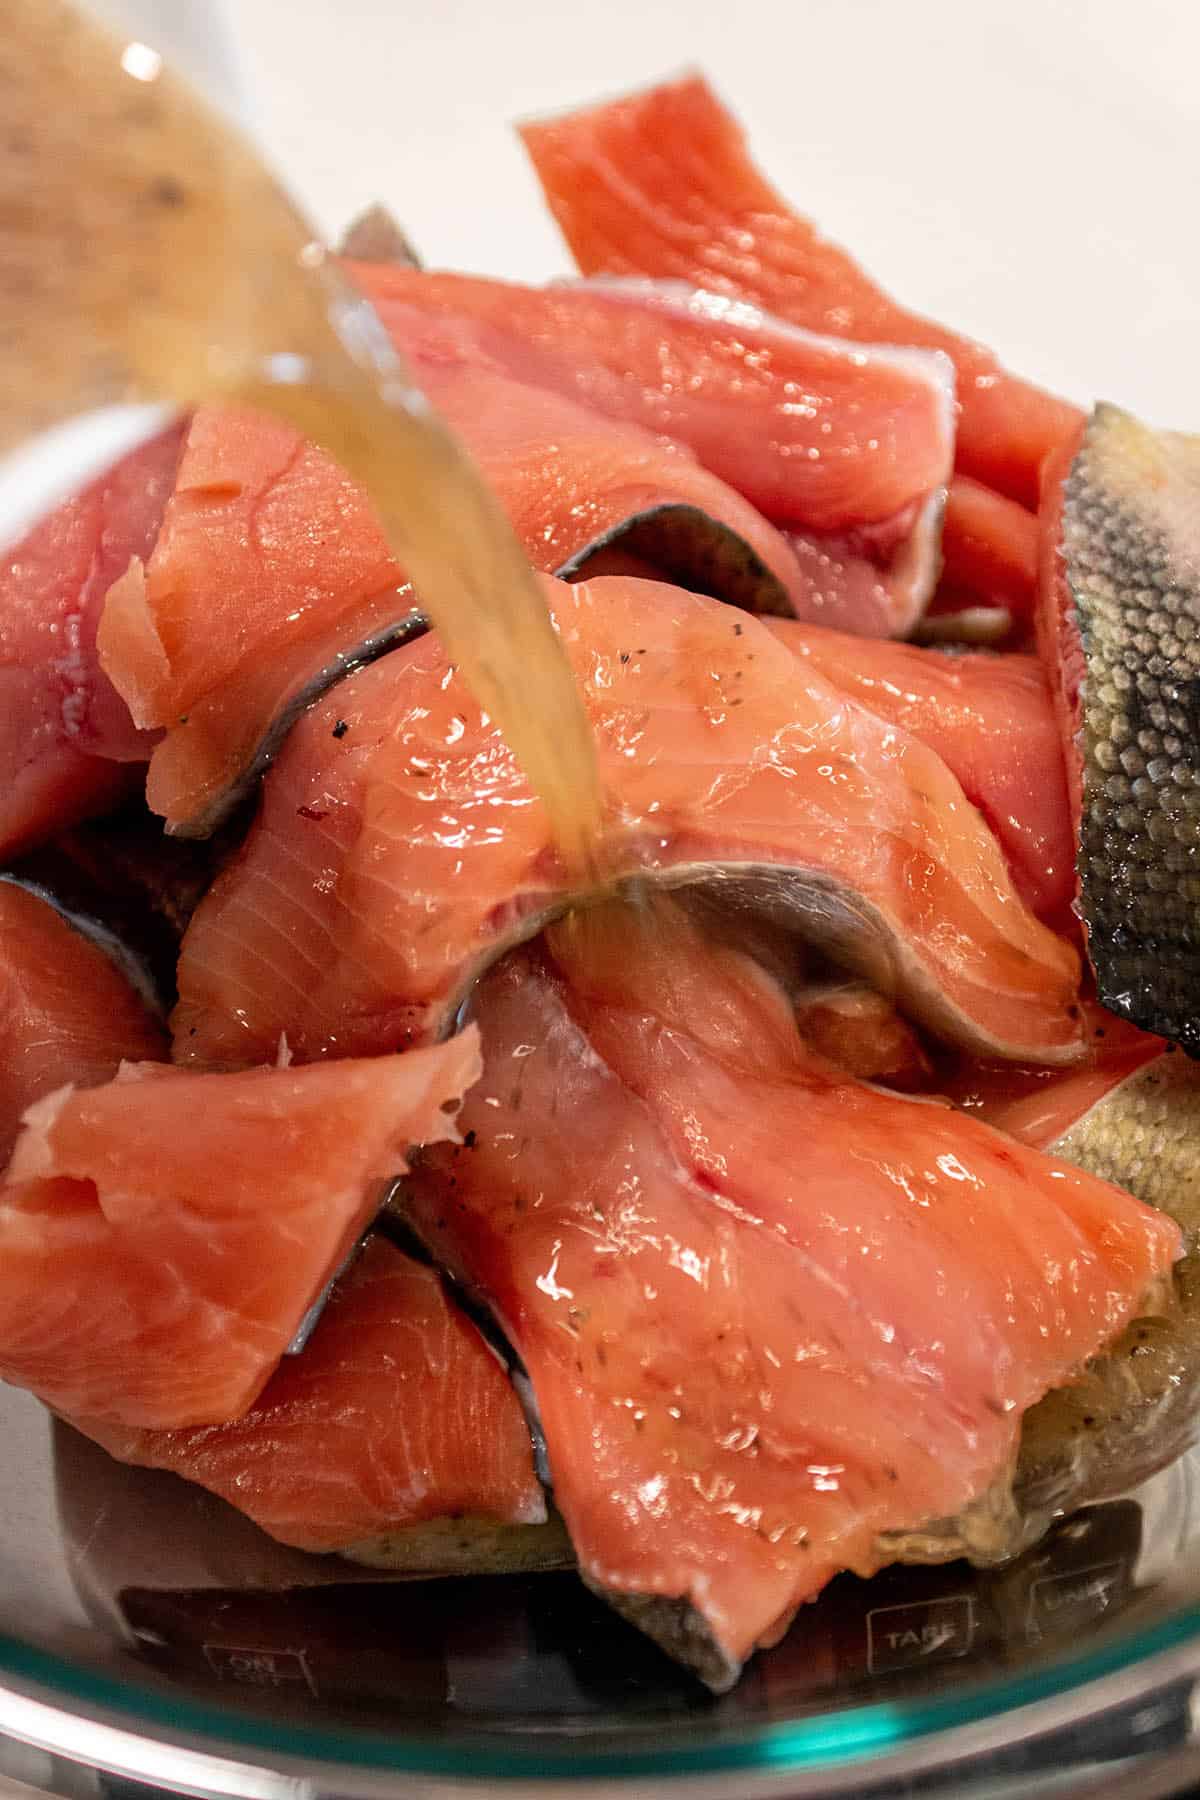 A glass bowl with pieces of salmon filet with a brine mix being poured over the top.